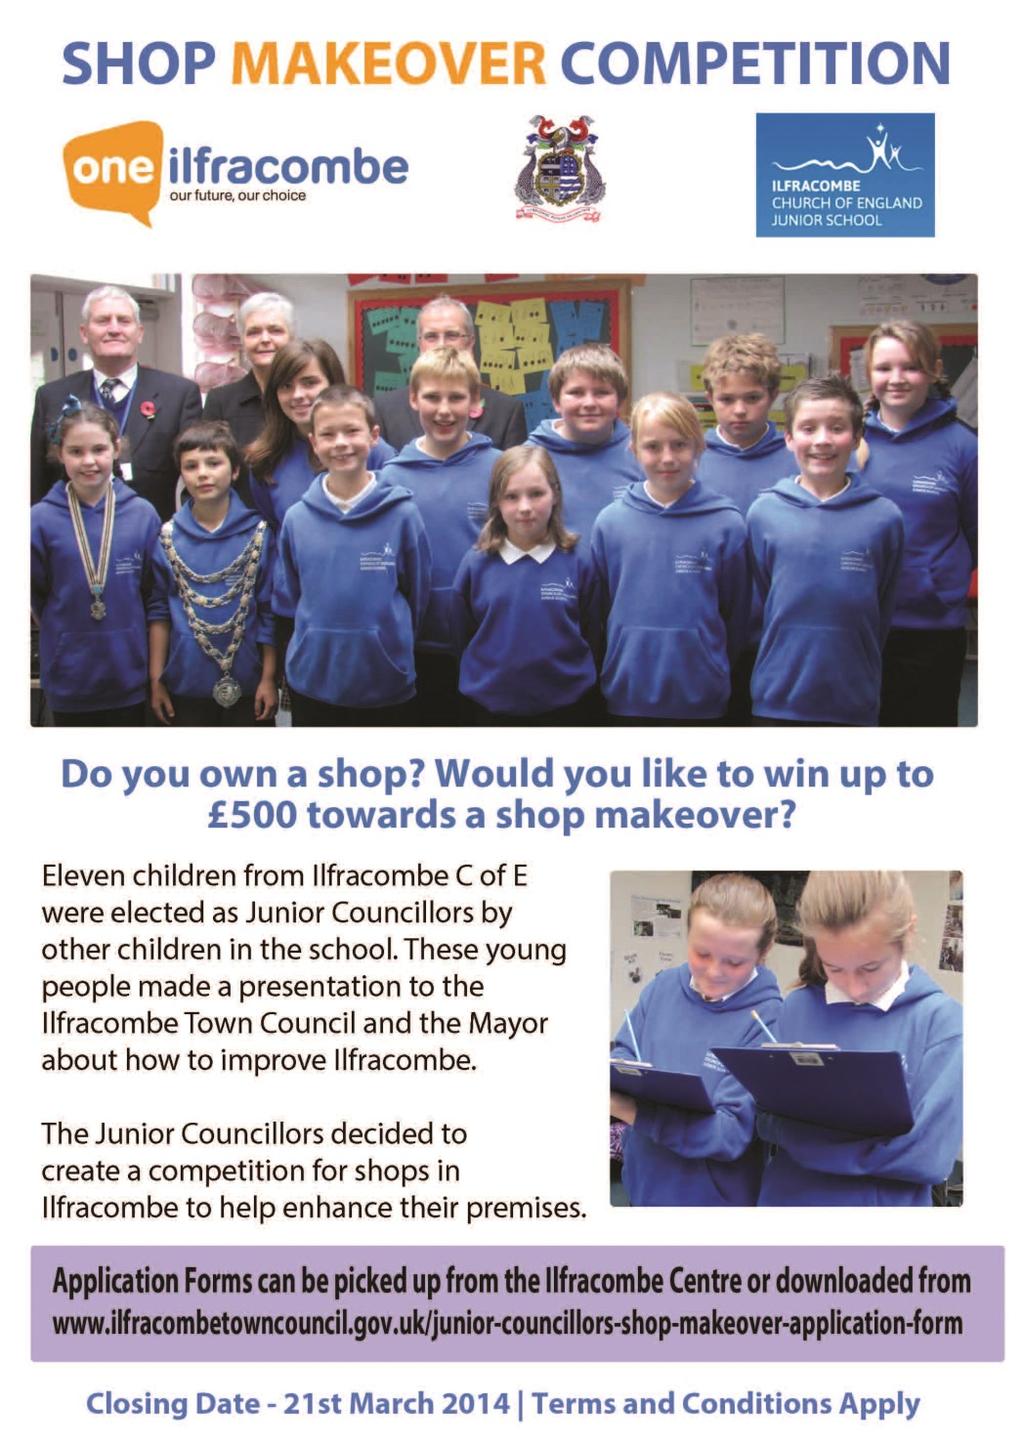 The funding, which is being made available from One Ilfracombe s Town Team, was provided after a special day with Ilfracombe Town Council, in which eleven Junior councillors from Ilfracombe C of E